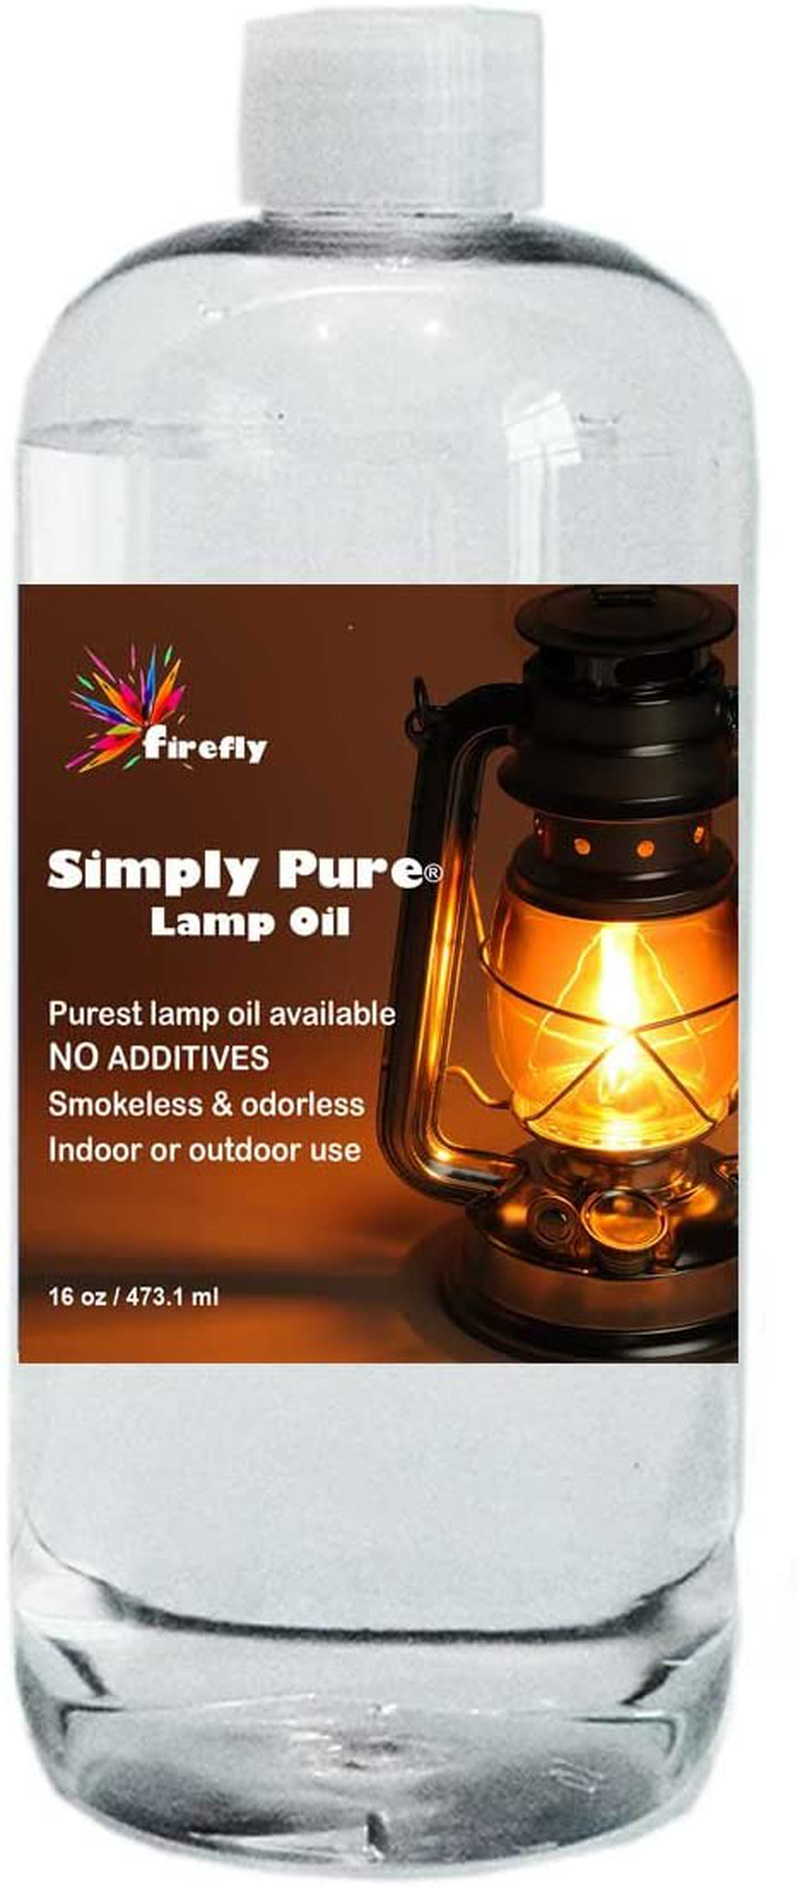 Firefly Modern Transcend Clear Glass Oil Lamp | 2-Piece Borosilicate Glass Includes Bliss Oil Candle Suspended in The Hurricane Candle Holder Sleeve - Includes 16 oz. Smokeless, Paraffin Lamp Oil